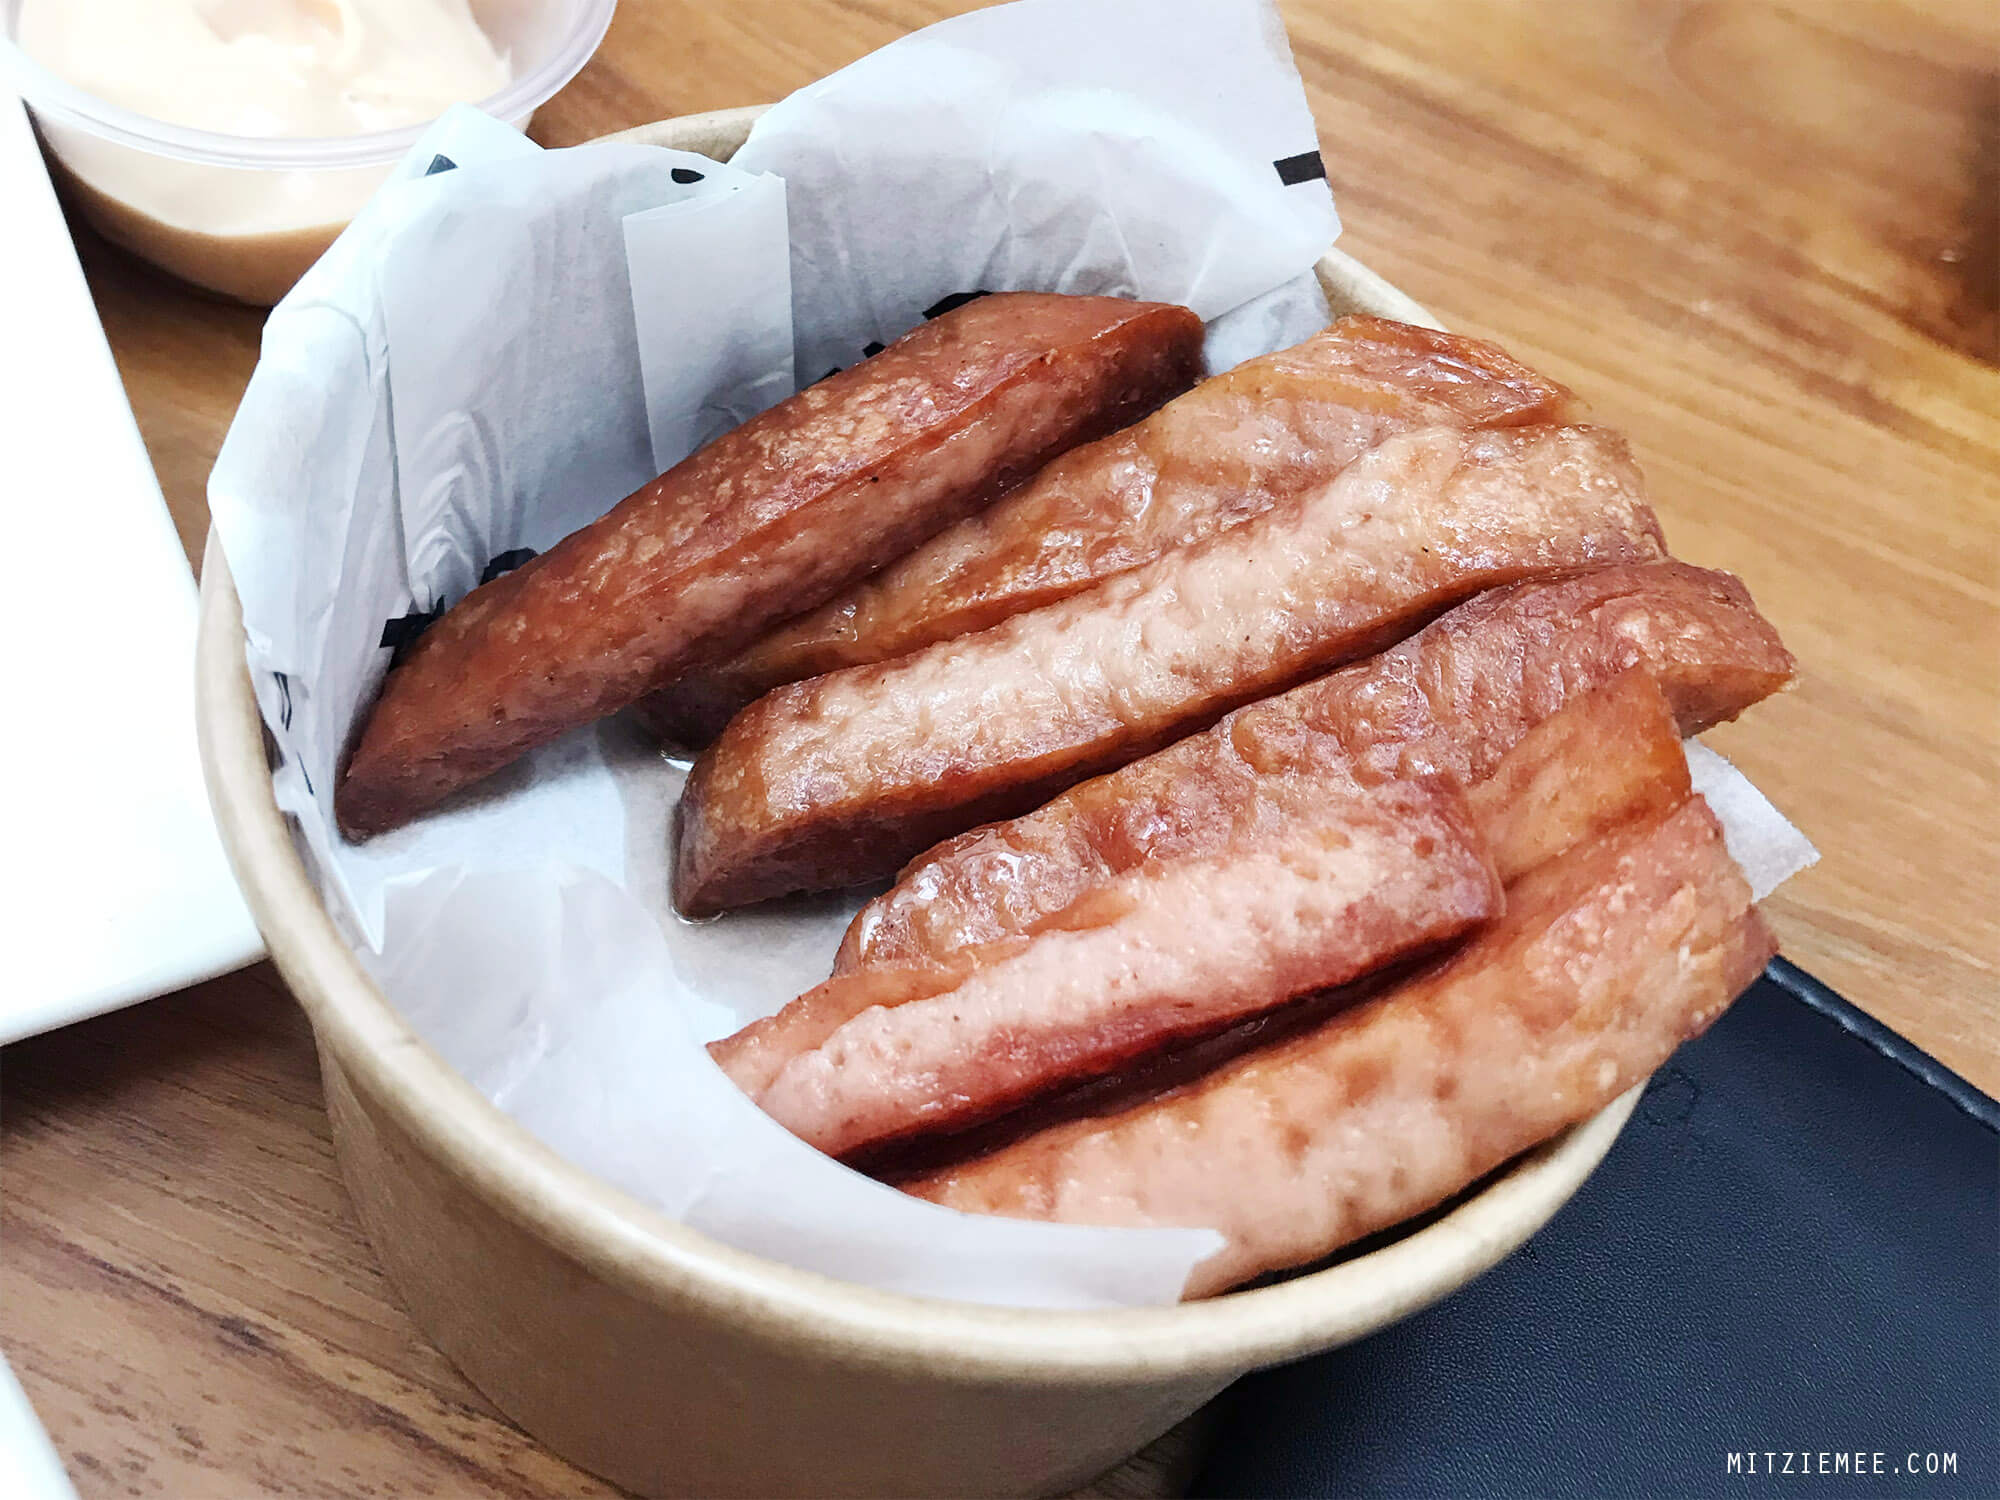 Spam fries at Tap, Singapore